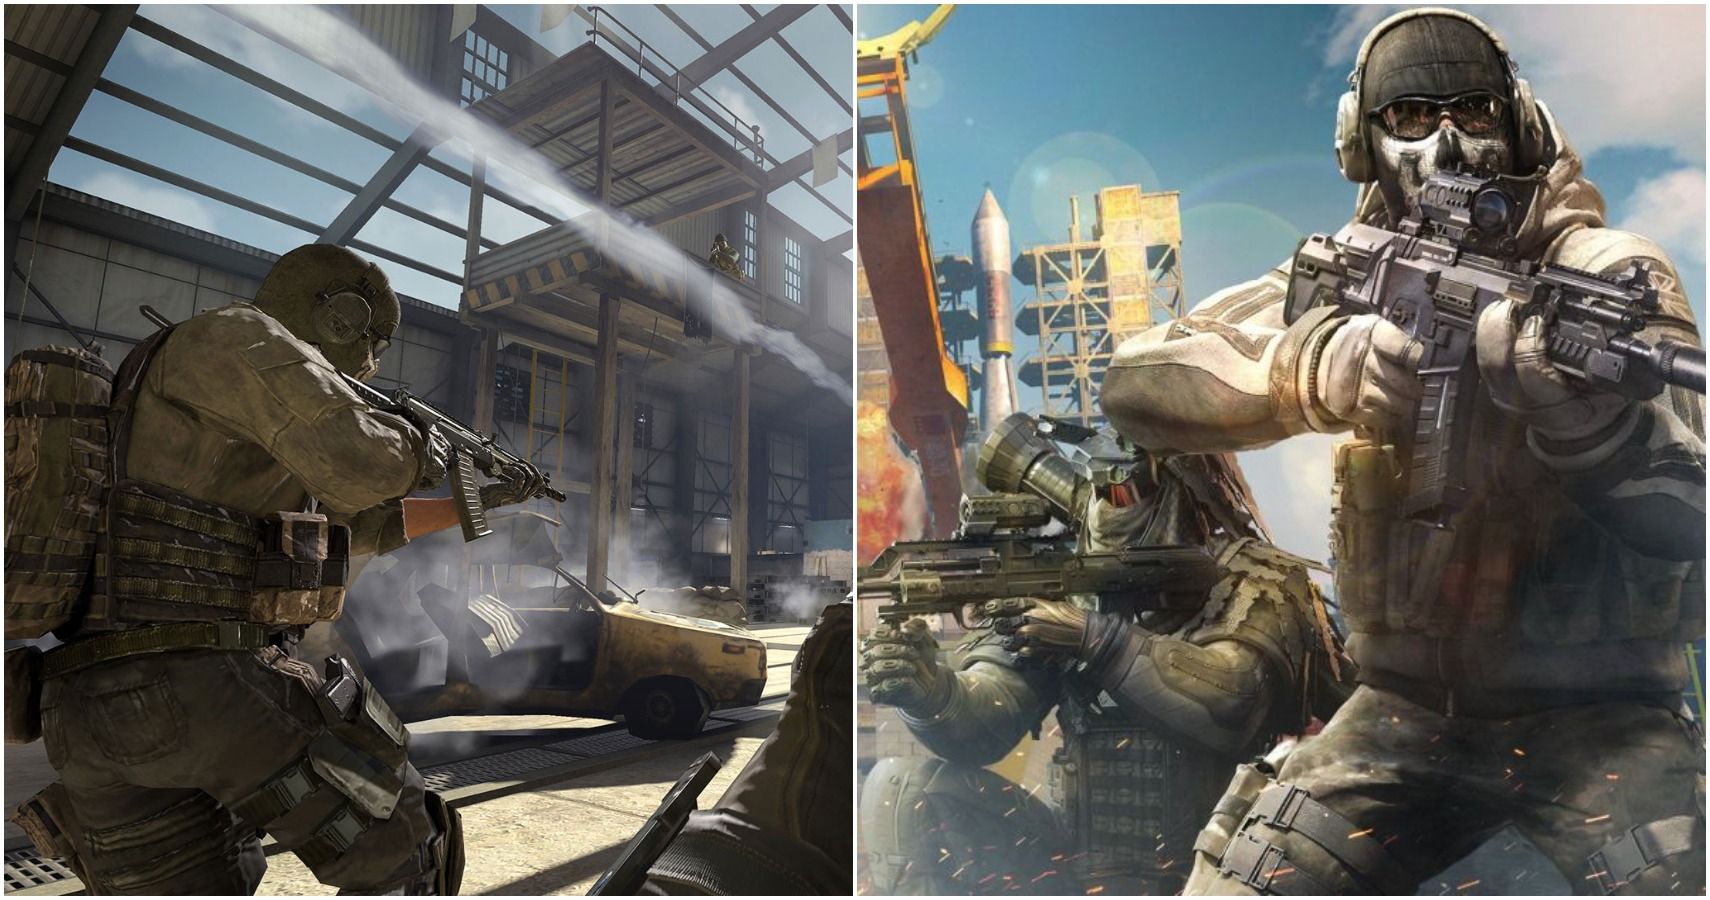 10 Tips and Tricks for Call of Duty: Mobile